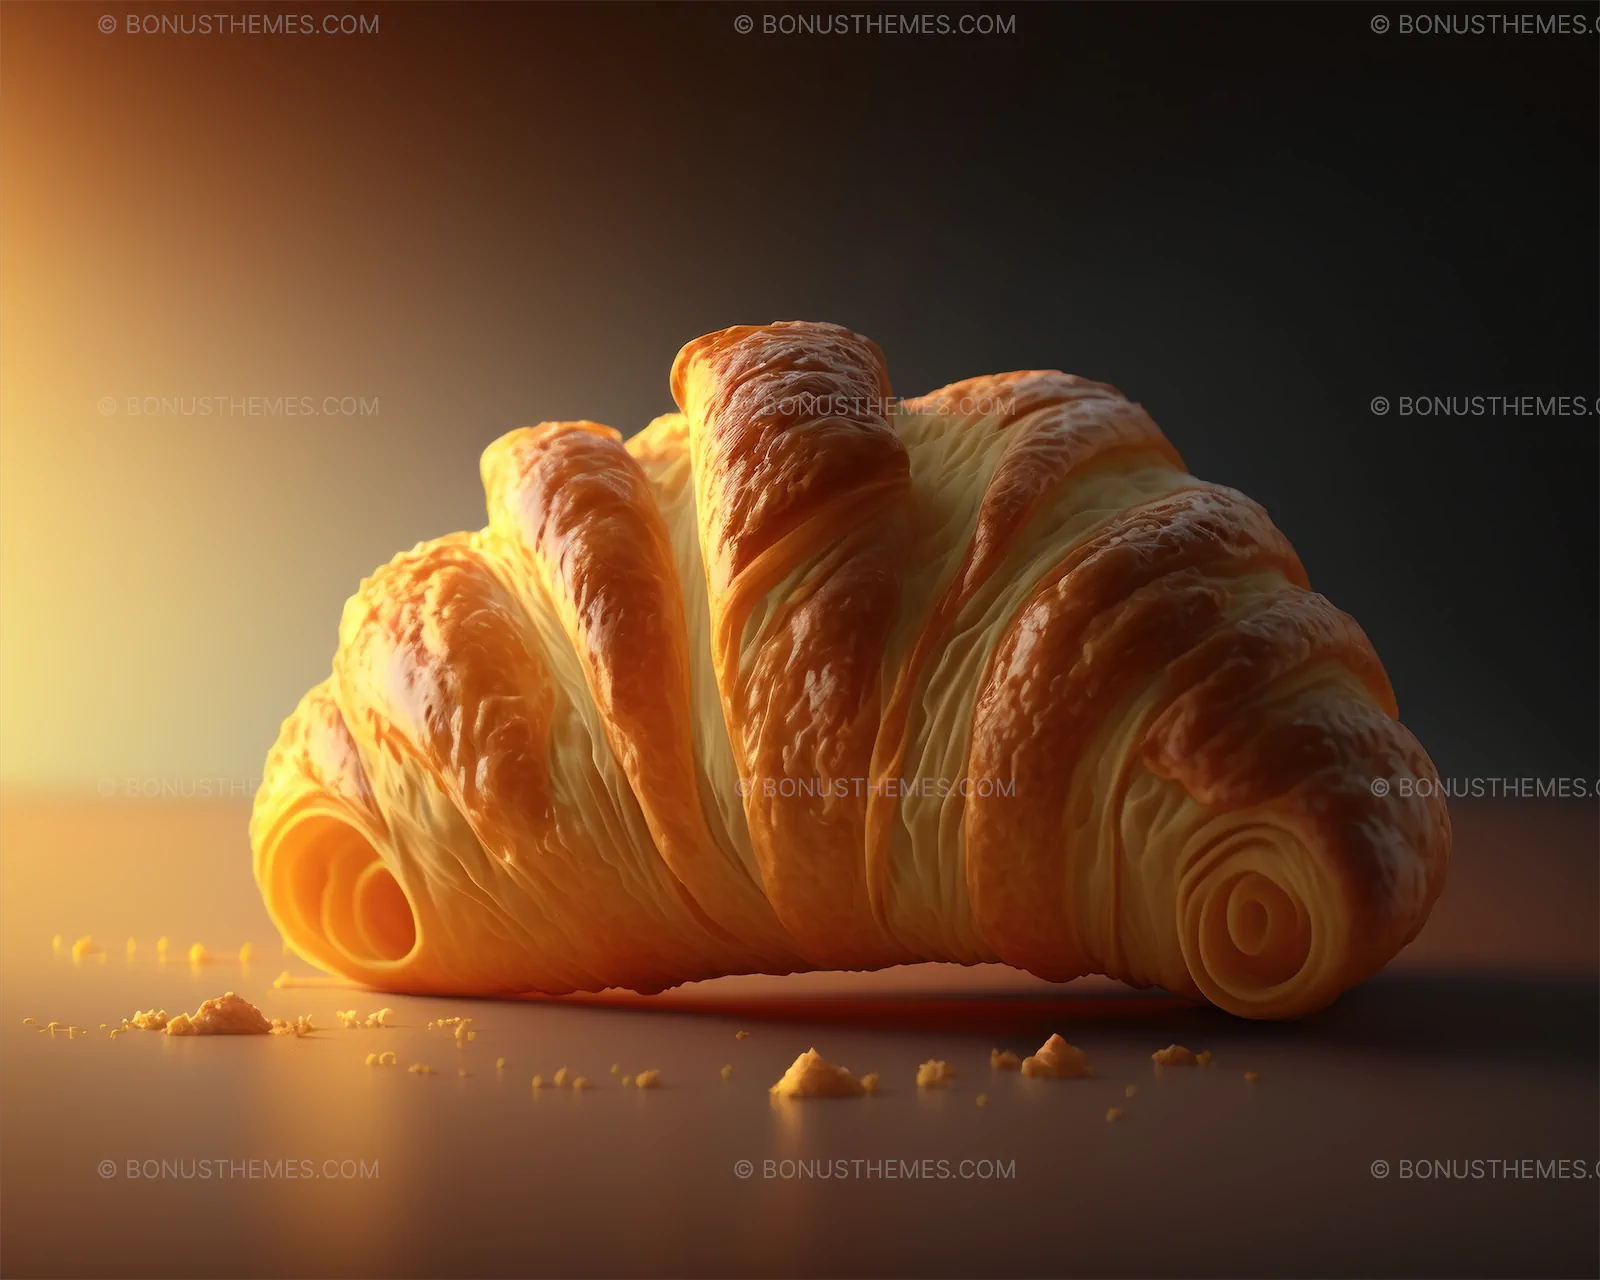 Croissant with cream for breakfast on a wooden table